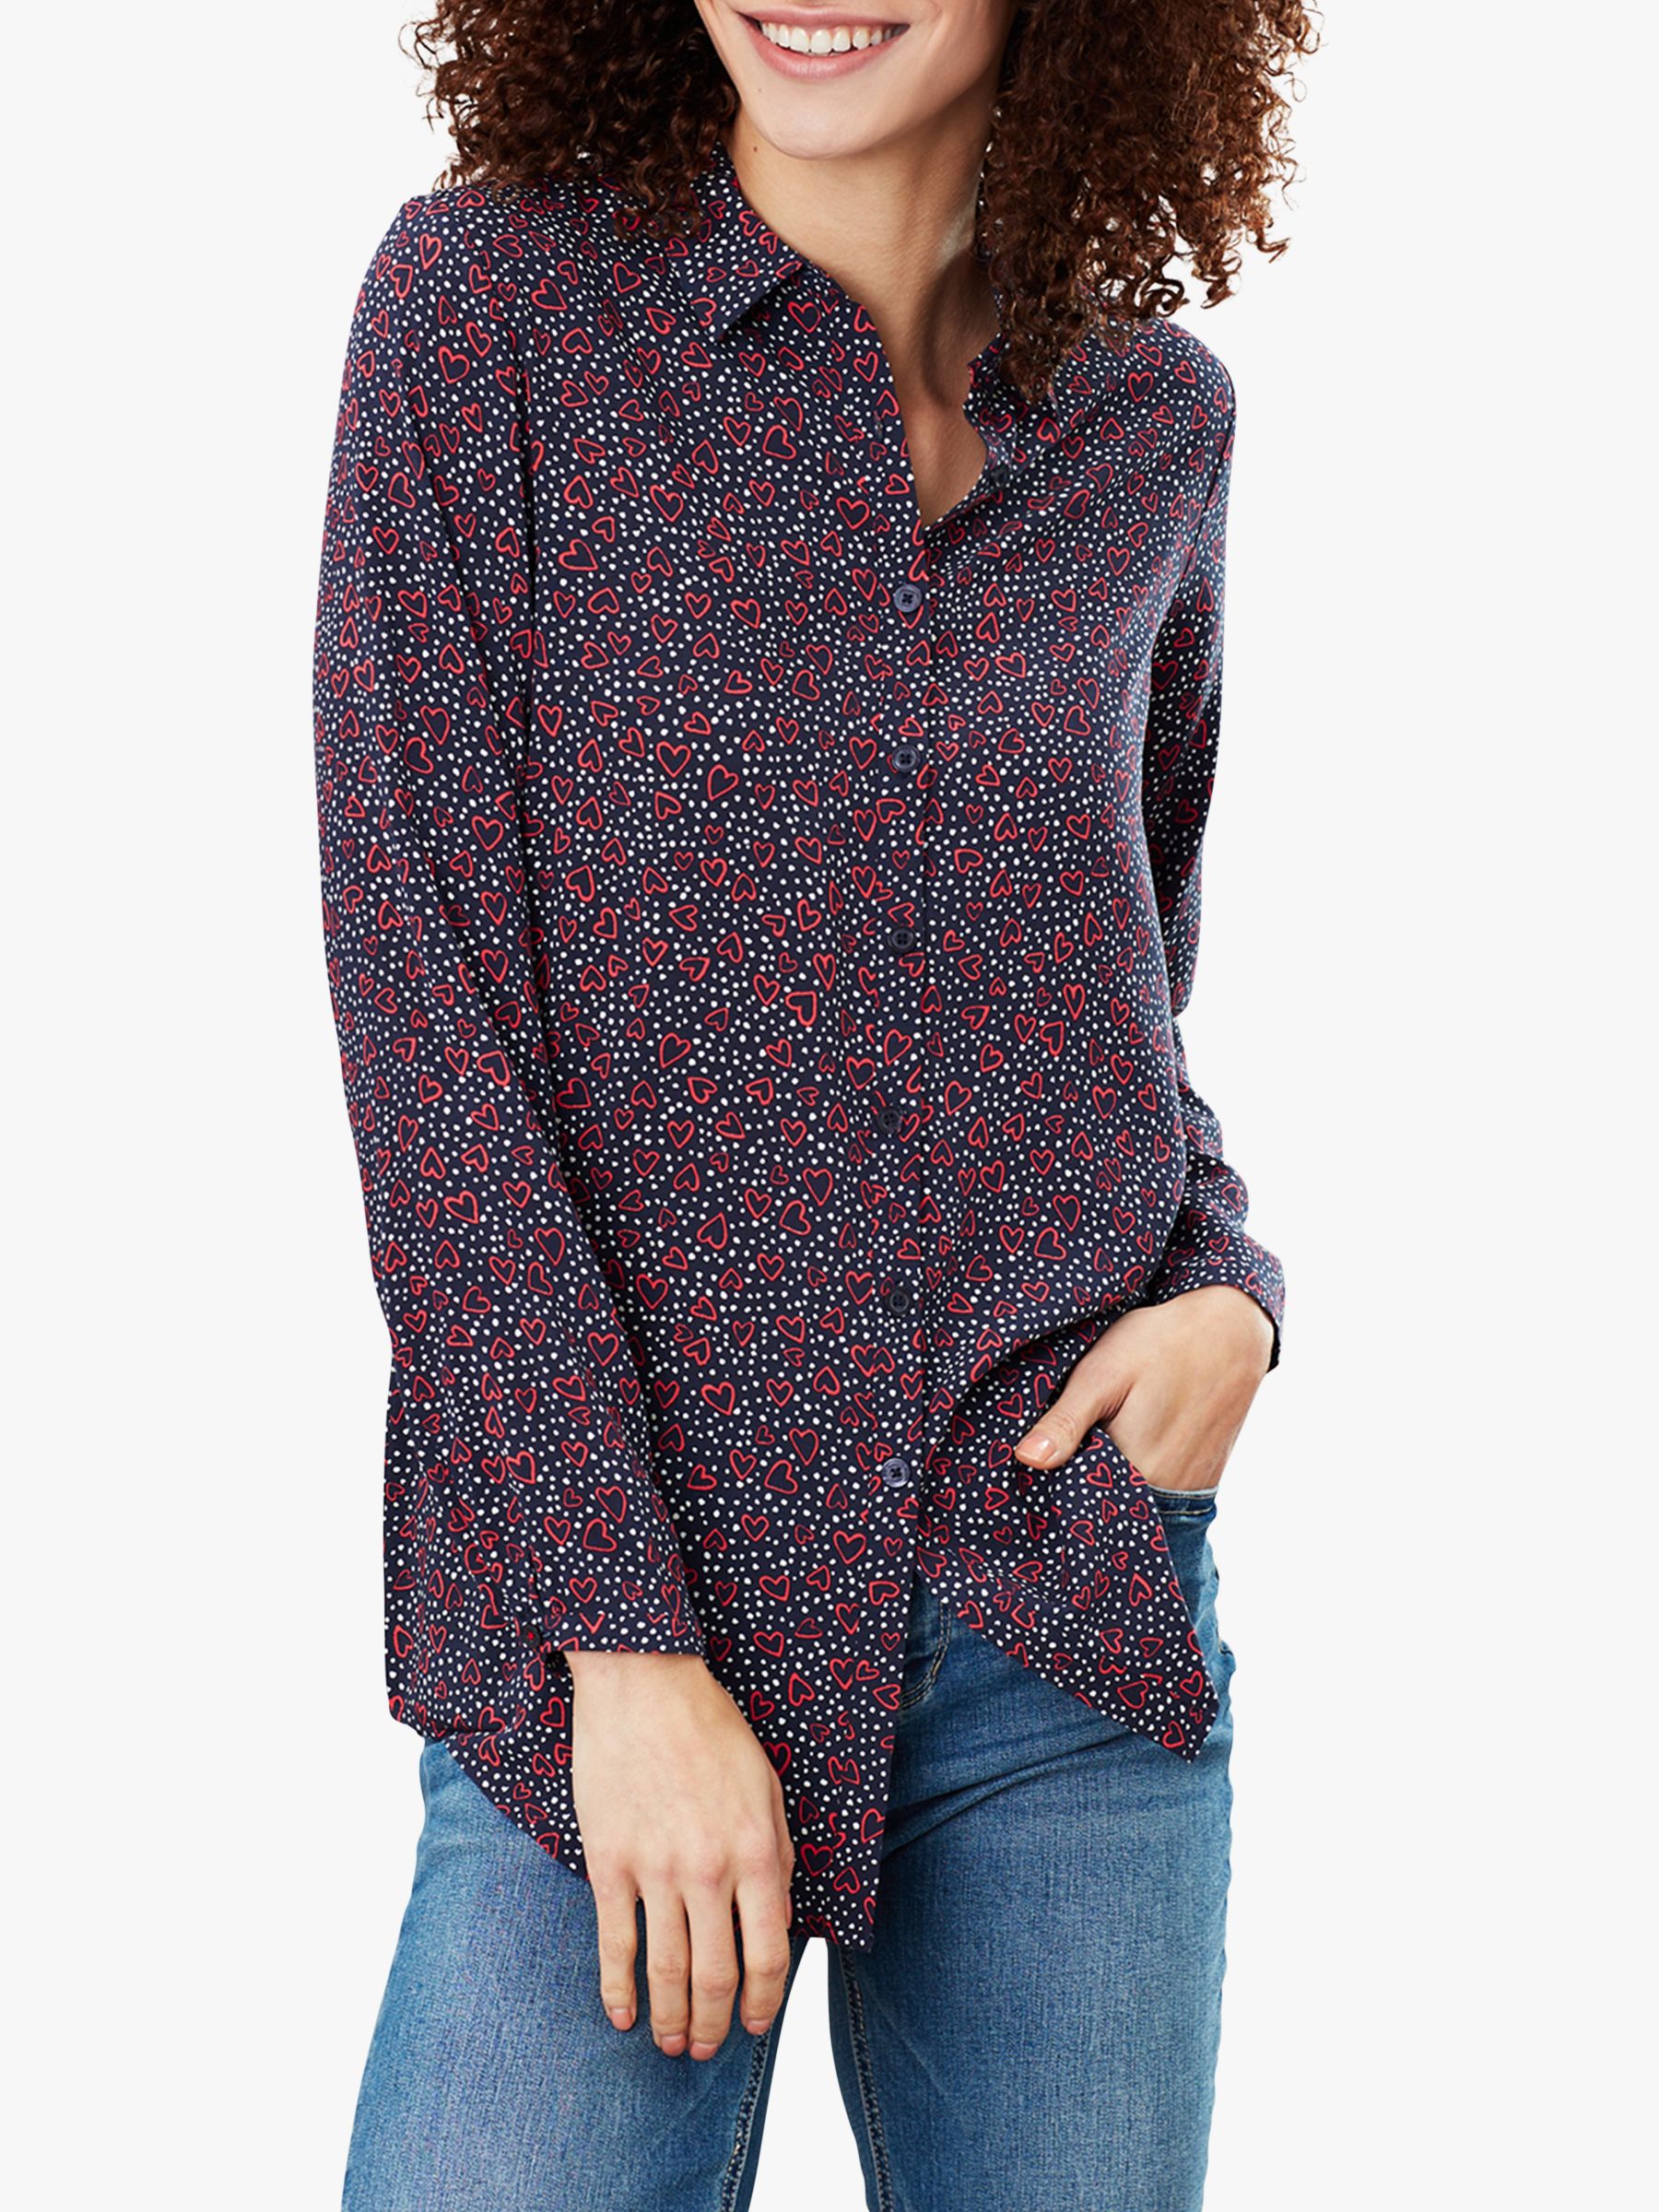 Joules Elvina Button Front Top, Dotty Heart at John Lewis & Partners